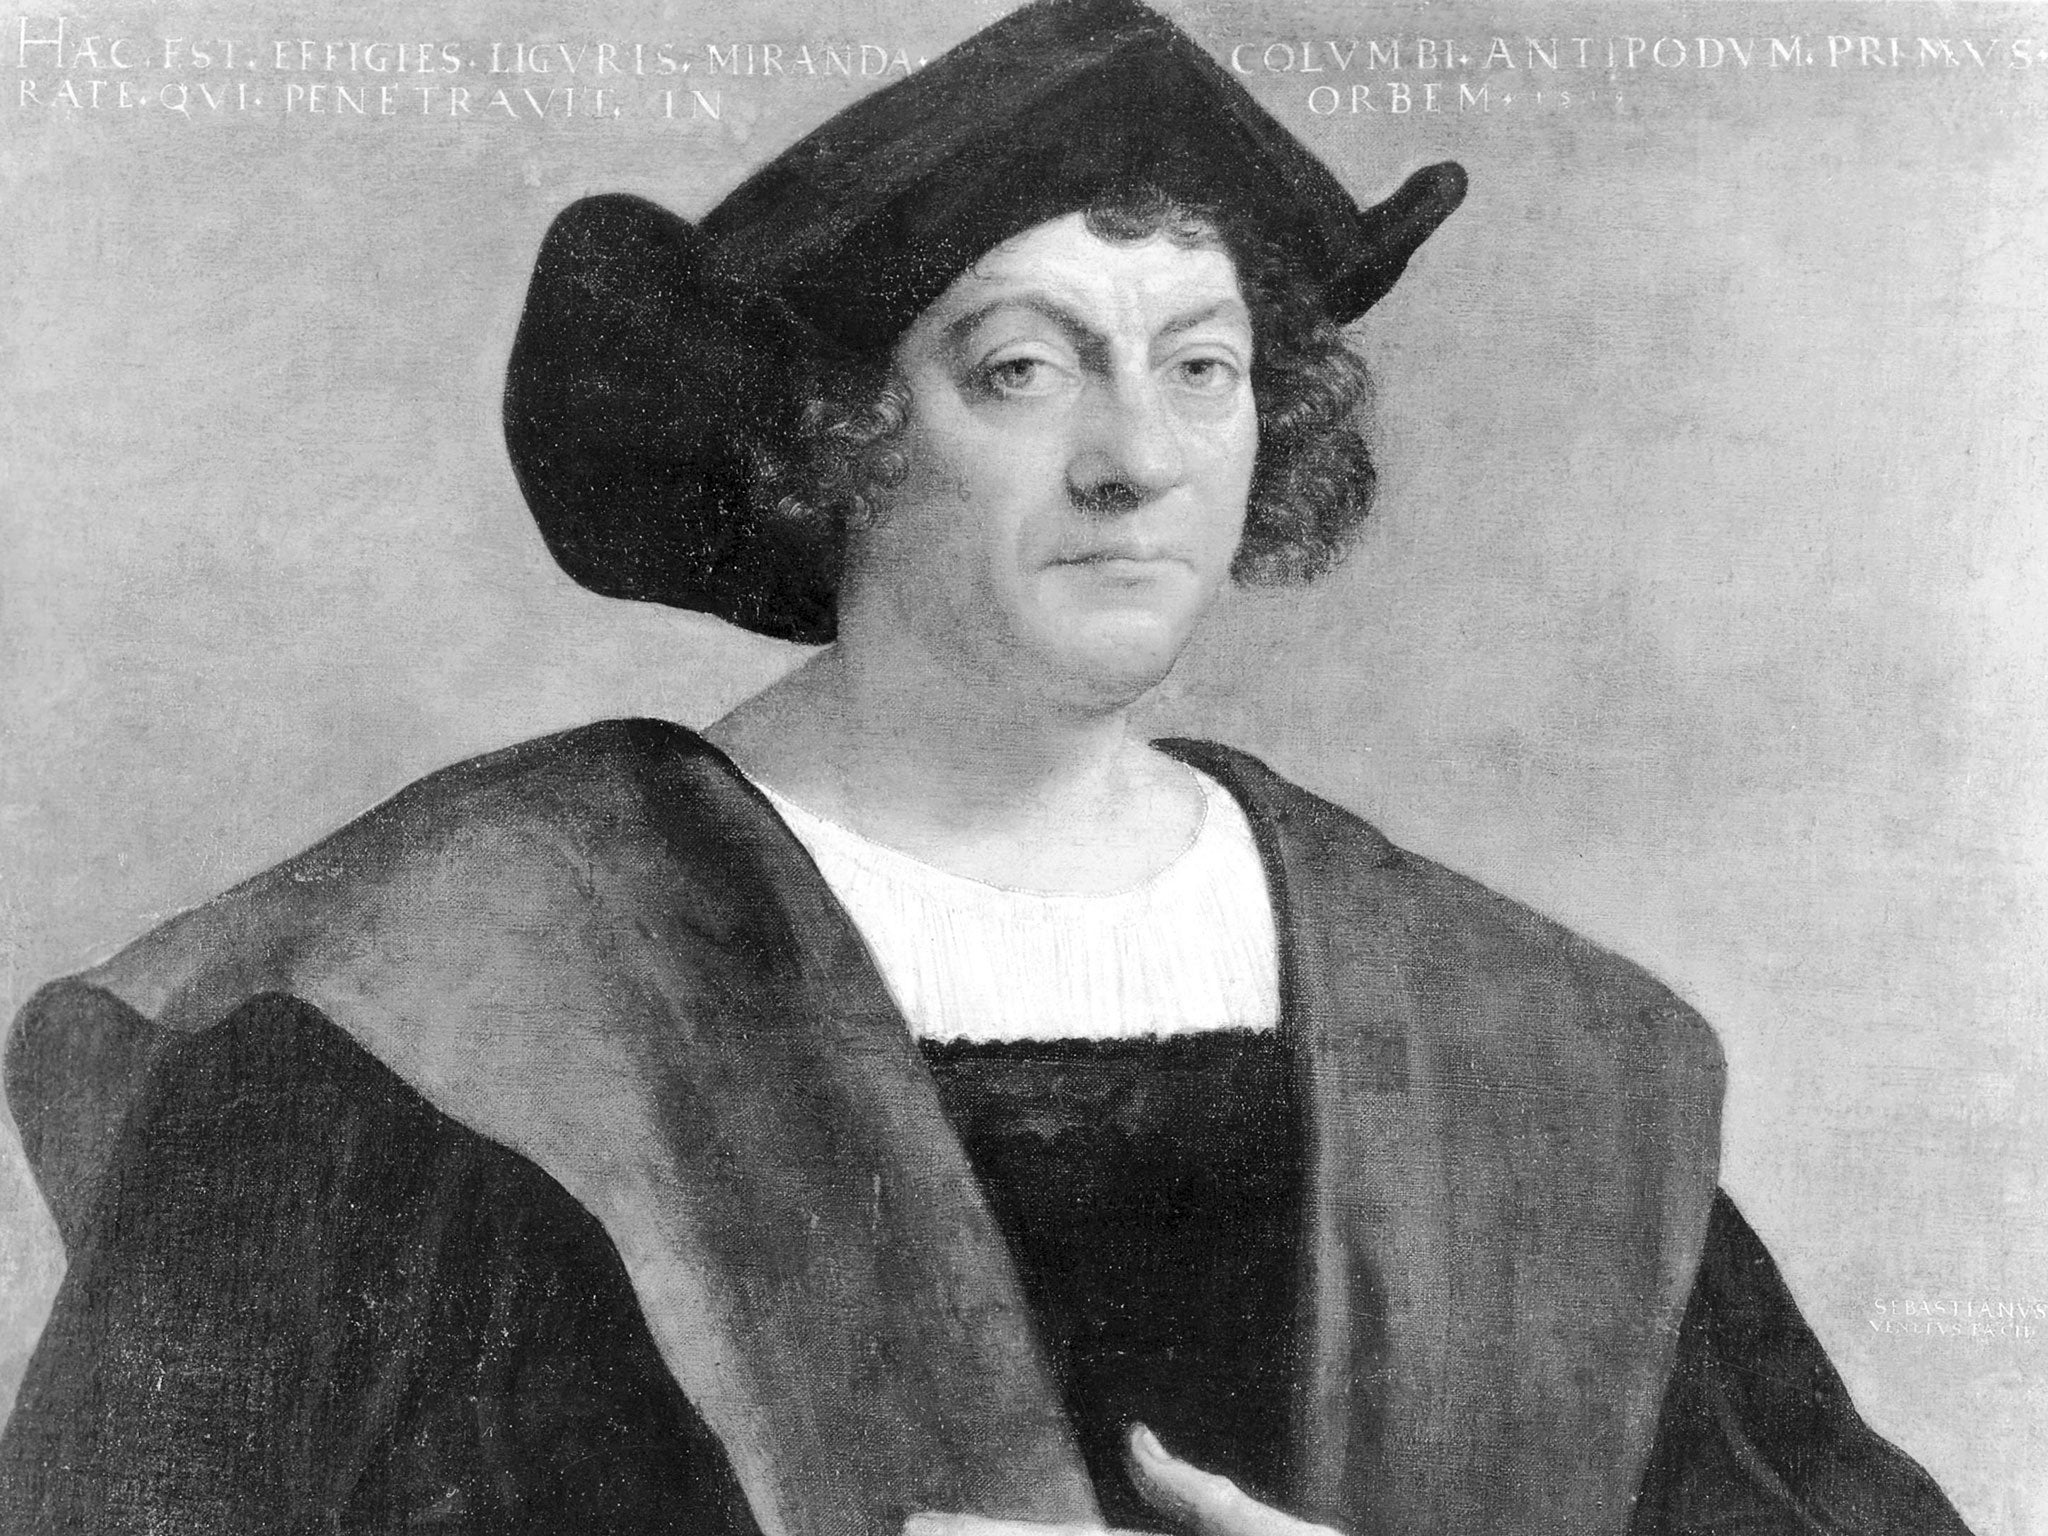 Christopher Columbus hired a ship in 1492 and sailed in it from southern Spain’s Atlantic coast in search of a new western route to Asia (Rex)